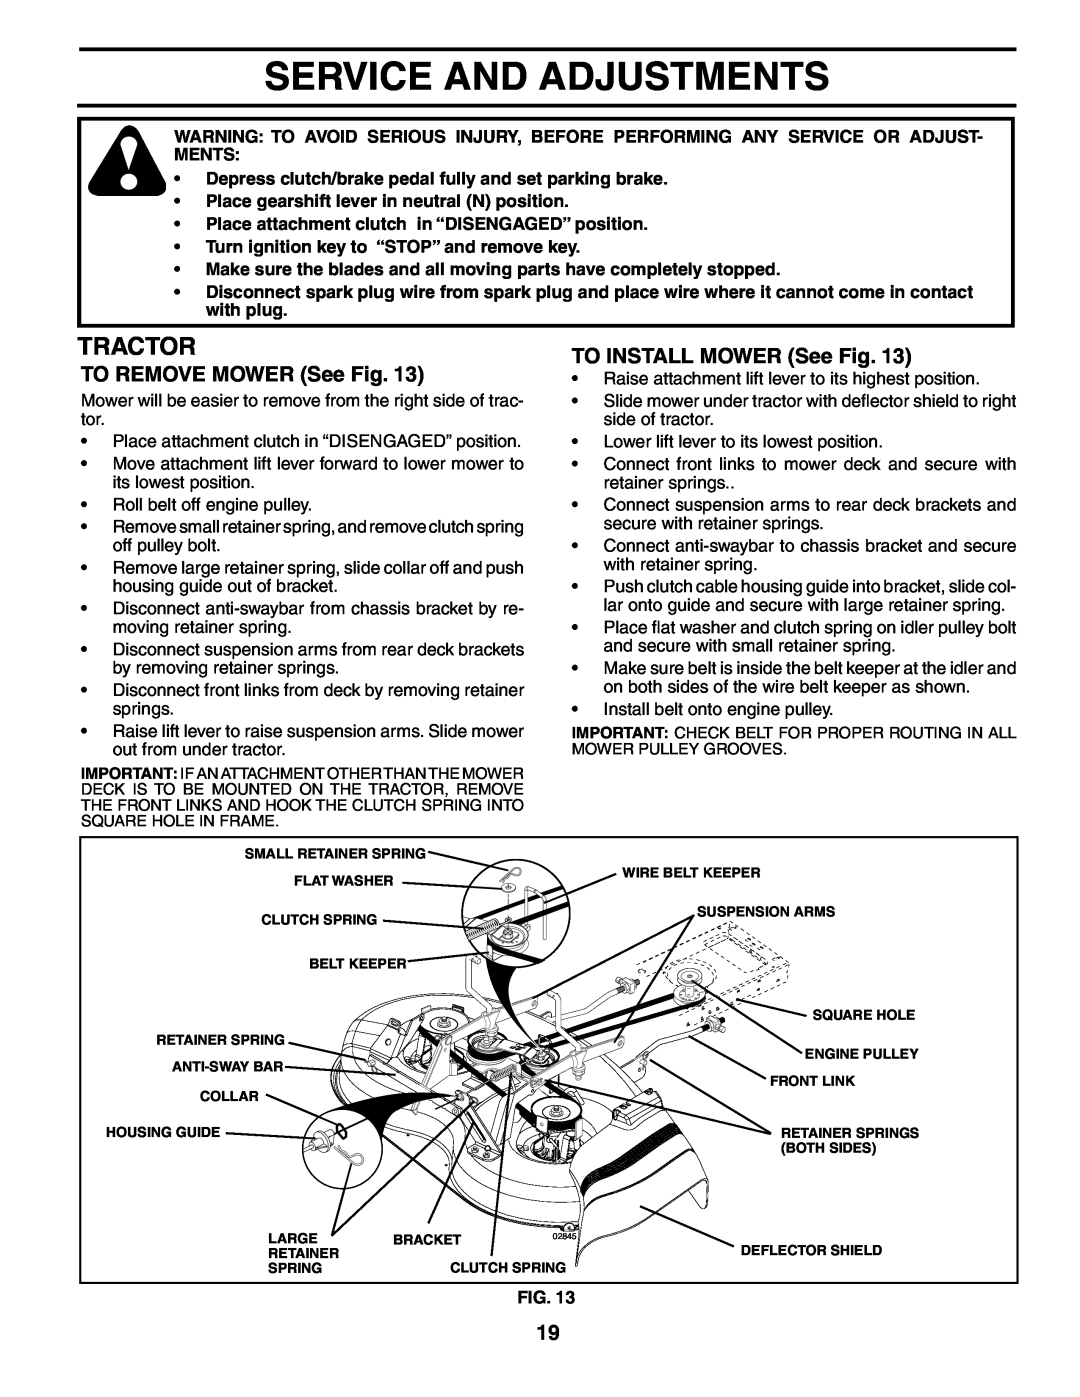 Poulan 401152, 96012004400 manual Service And Adjustments, TO REMOVE MOWER See Fig, TO INSTALL MOWER See Fig, Tractor 